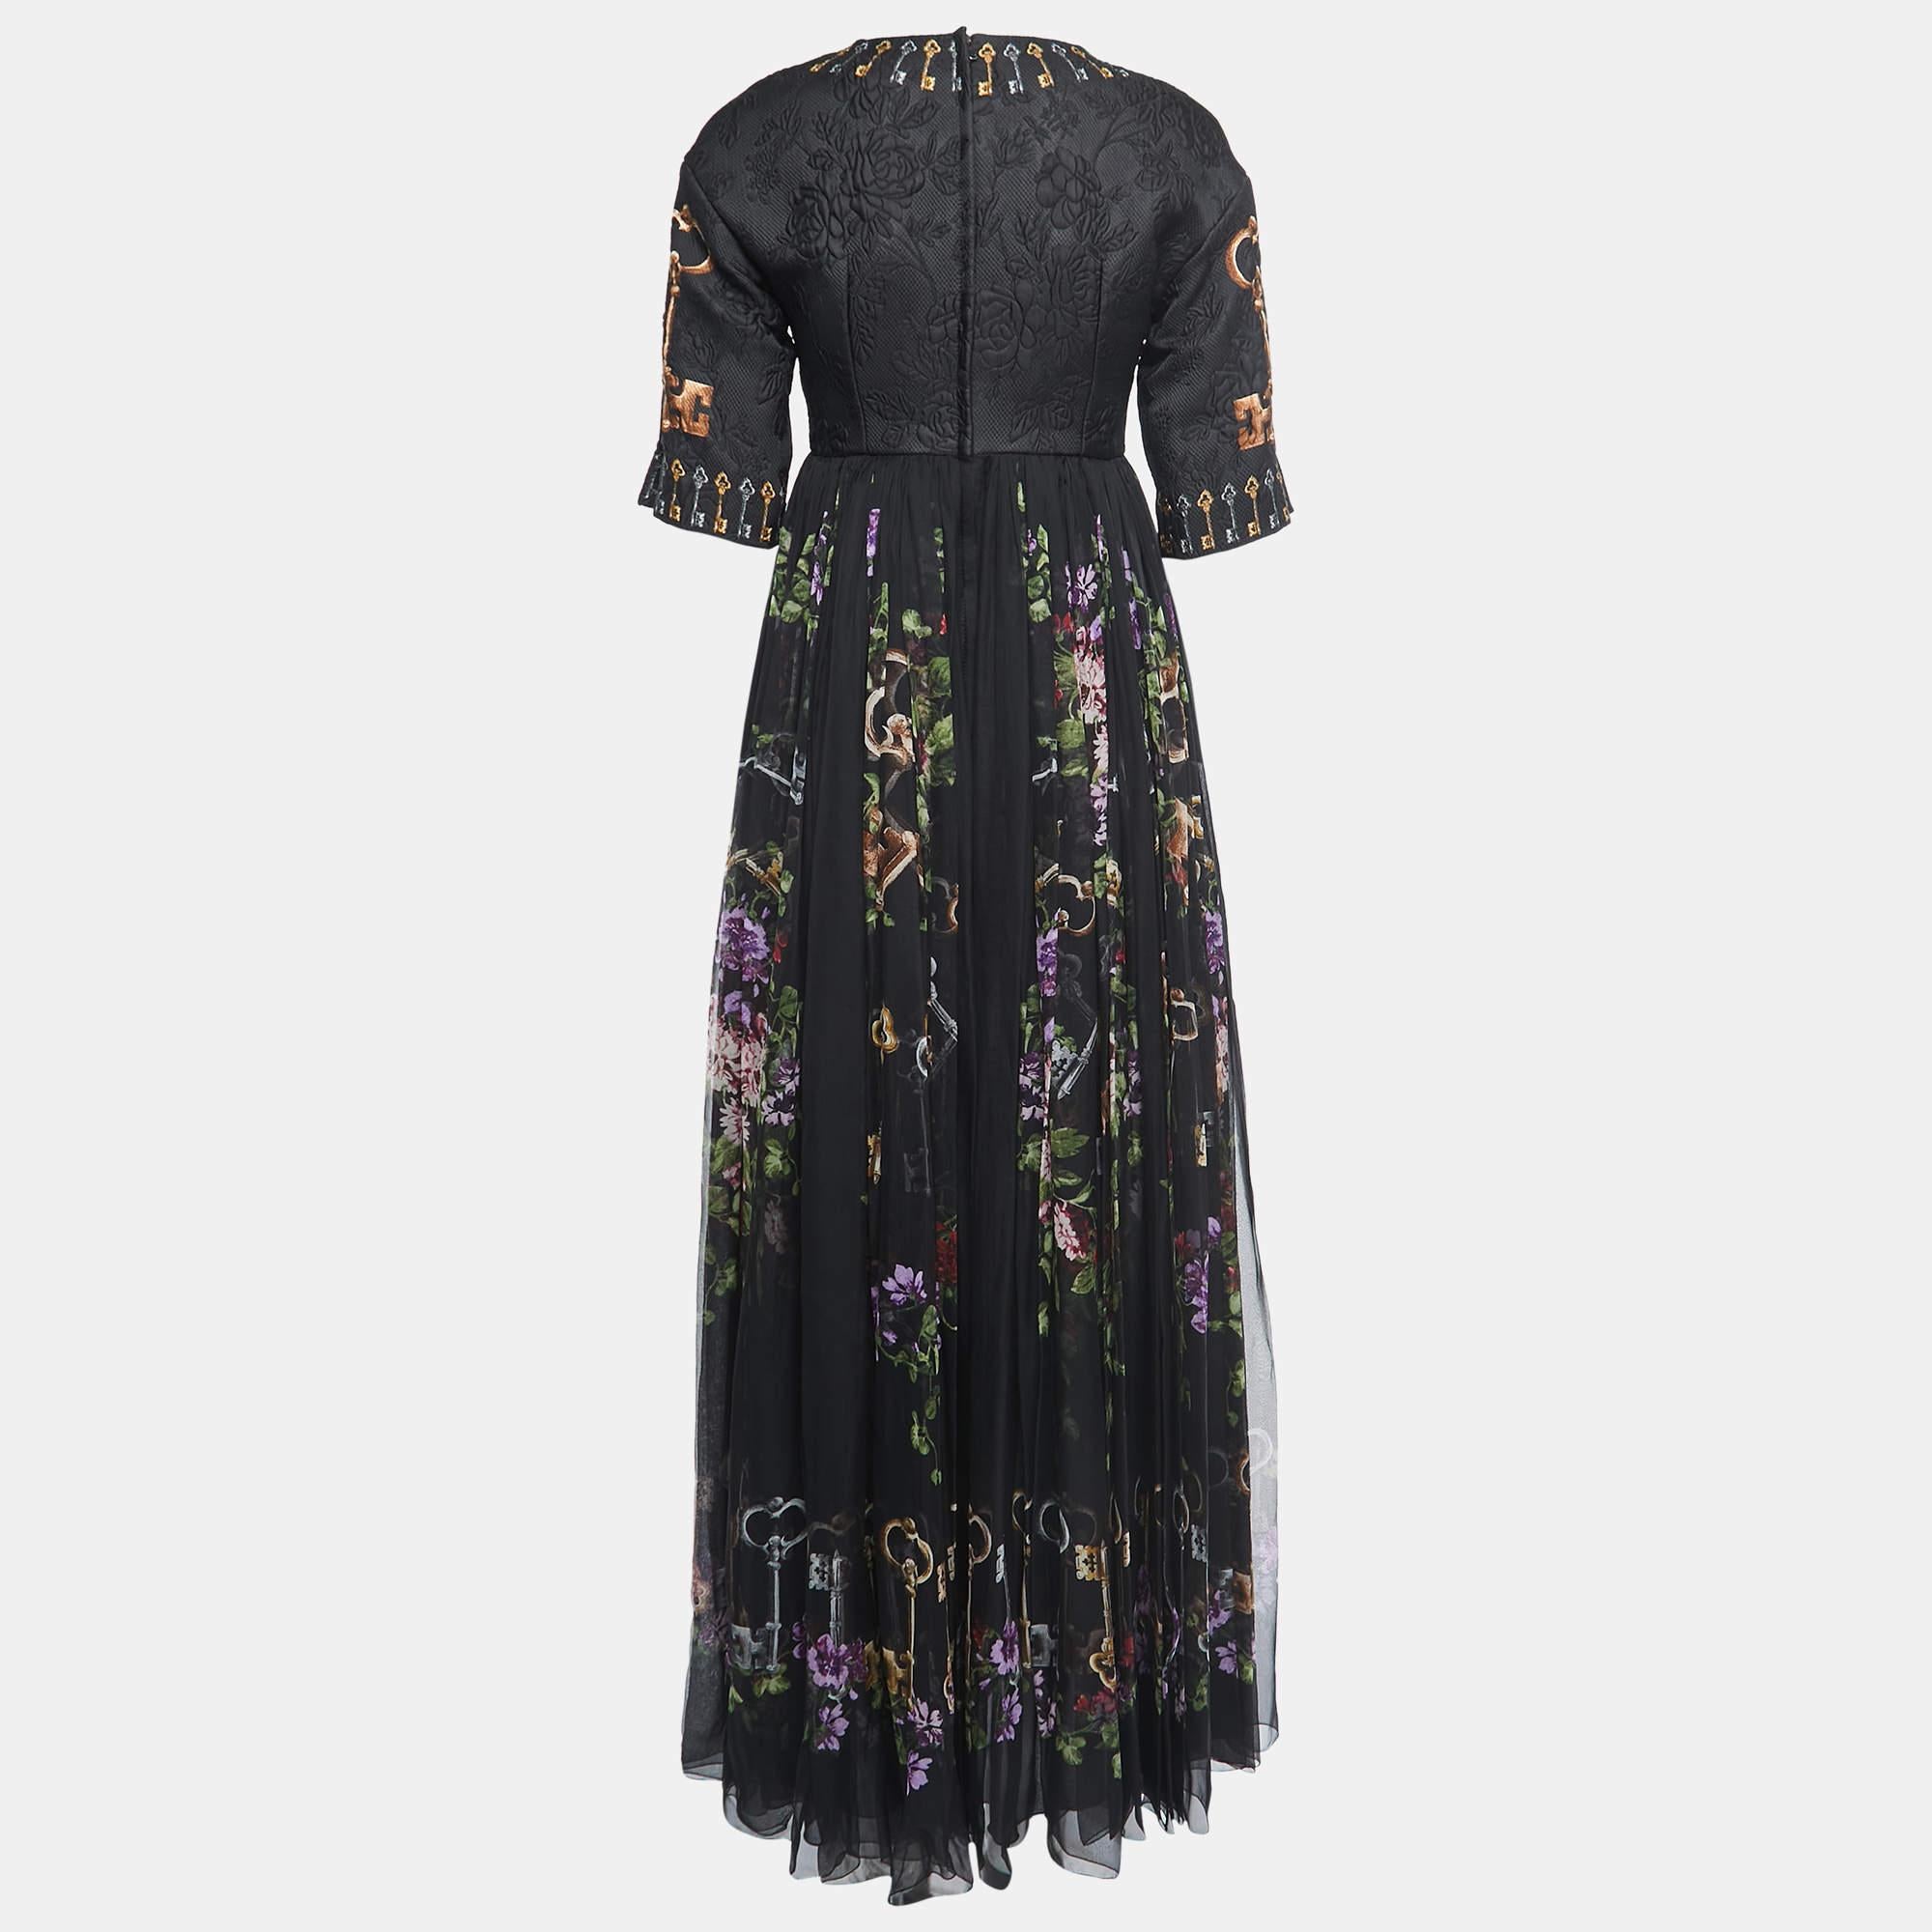 This Dolce & Gabbana dress is surely a wardrobe hero. The smartly updated black hue and the comfy shape make this one a day-to-night piece. The floral and key print flatters lending the dress an urbane touch. Pair it with printed heels for your